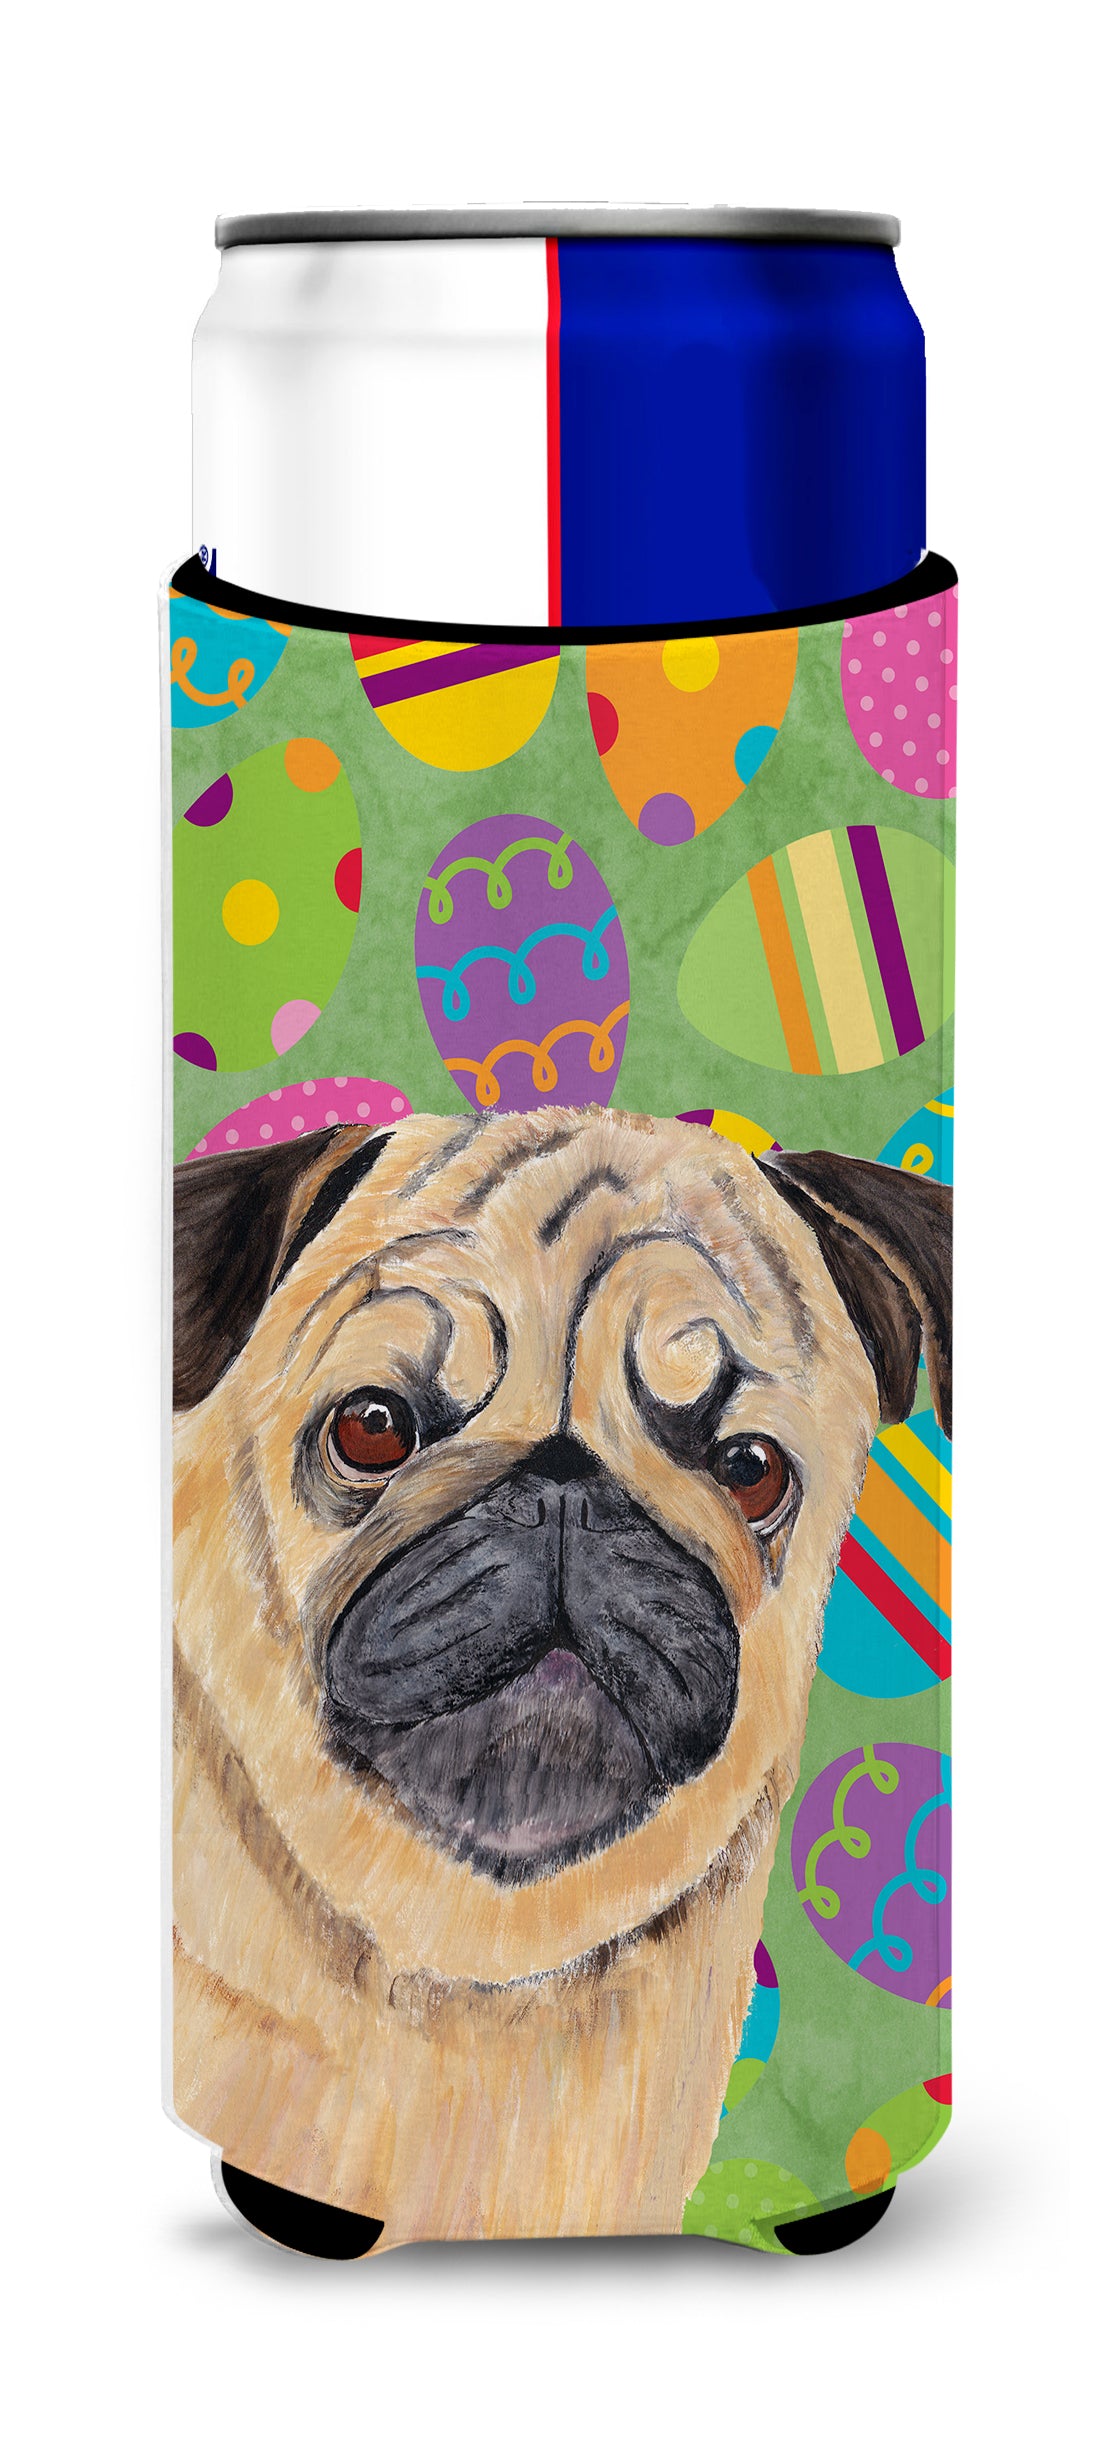 Pug Easter Eggtravaganza Ultra Beverage Insulators for slim cans SC9451MUK.